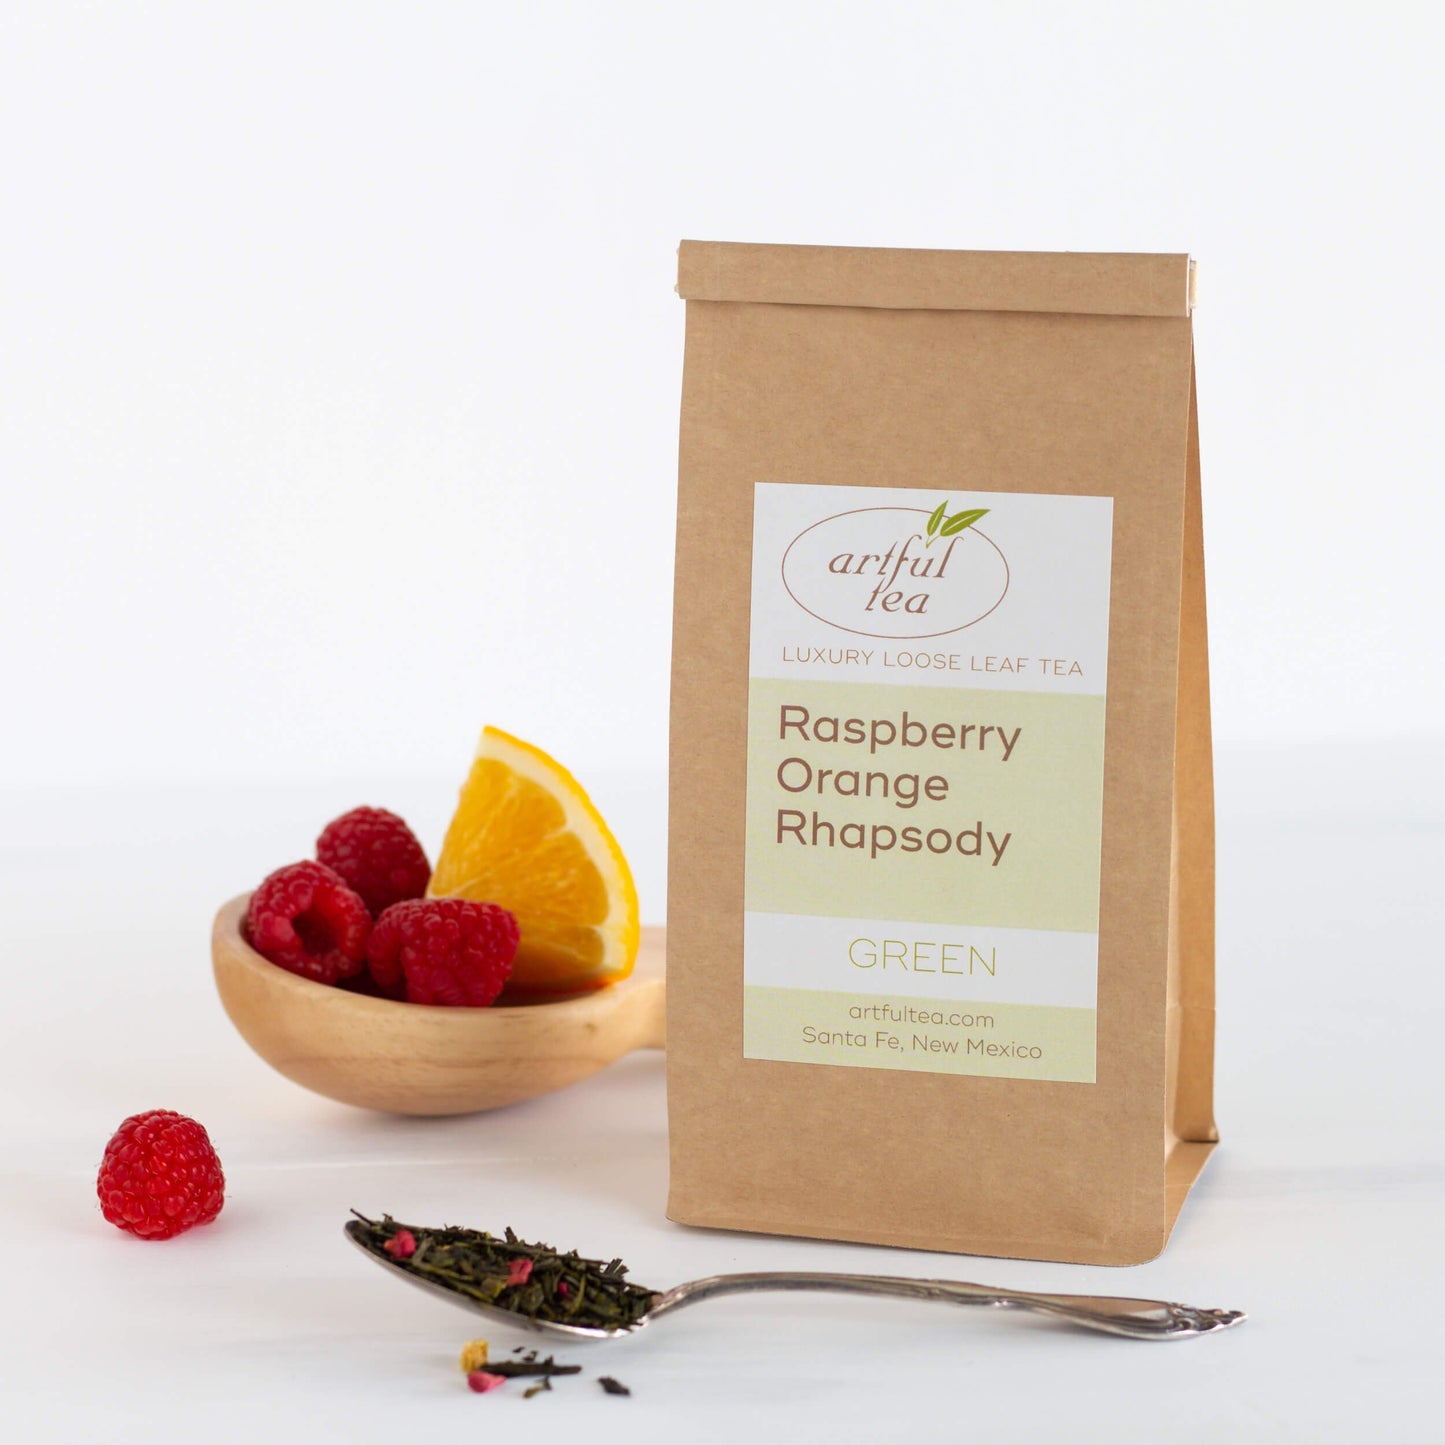 Raspberry Orange Rhapsody Green Tea shown packaged in a kraft bag, with a spoon full of tea leaves in the foreground and a wooden scoop with raspberries and an orange wedge displayed behind